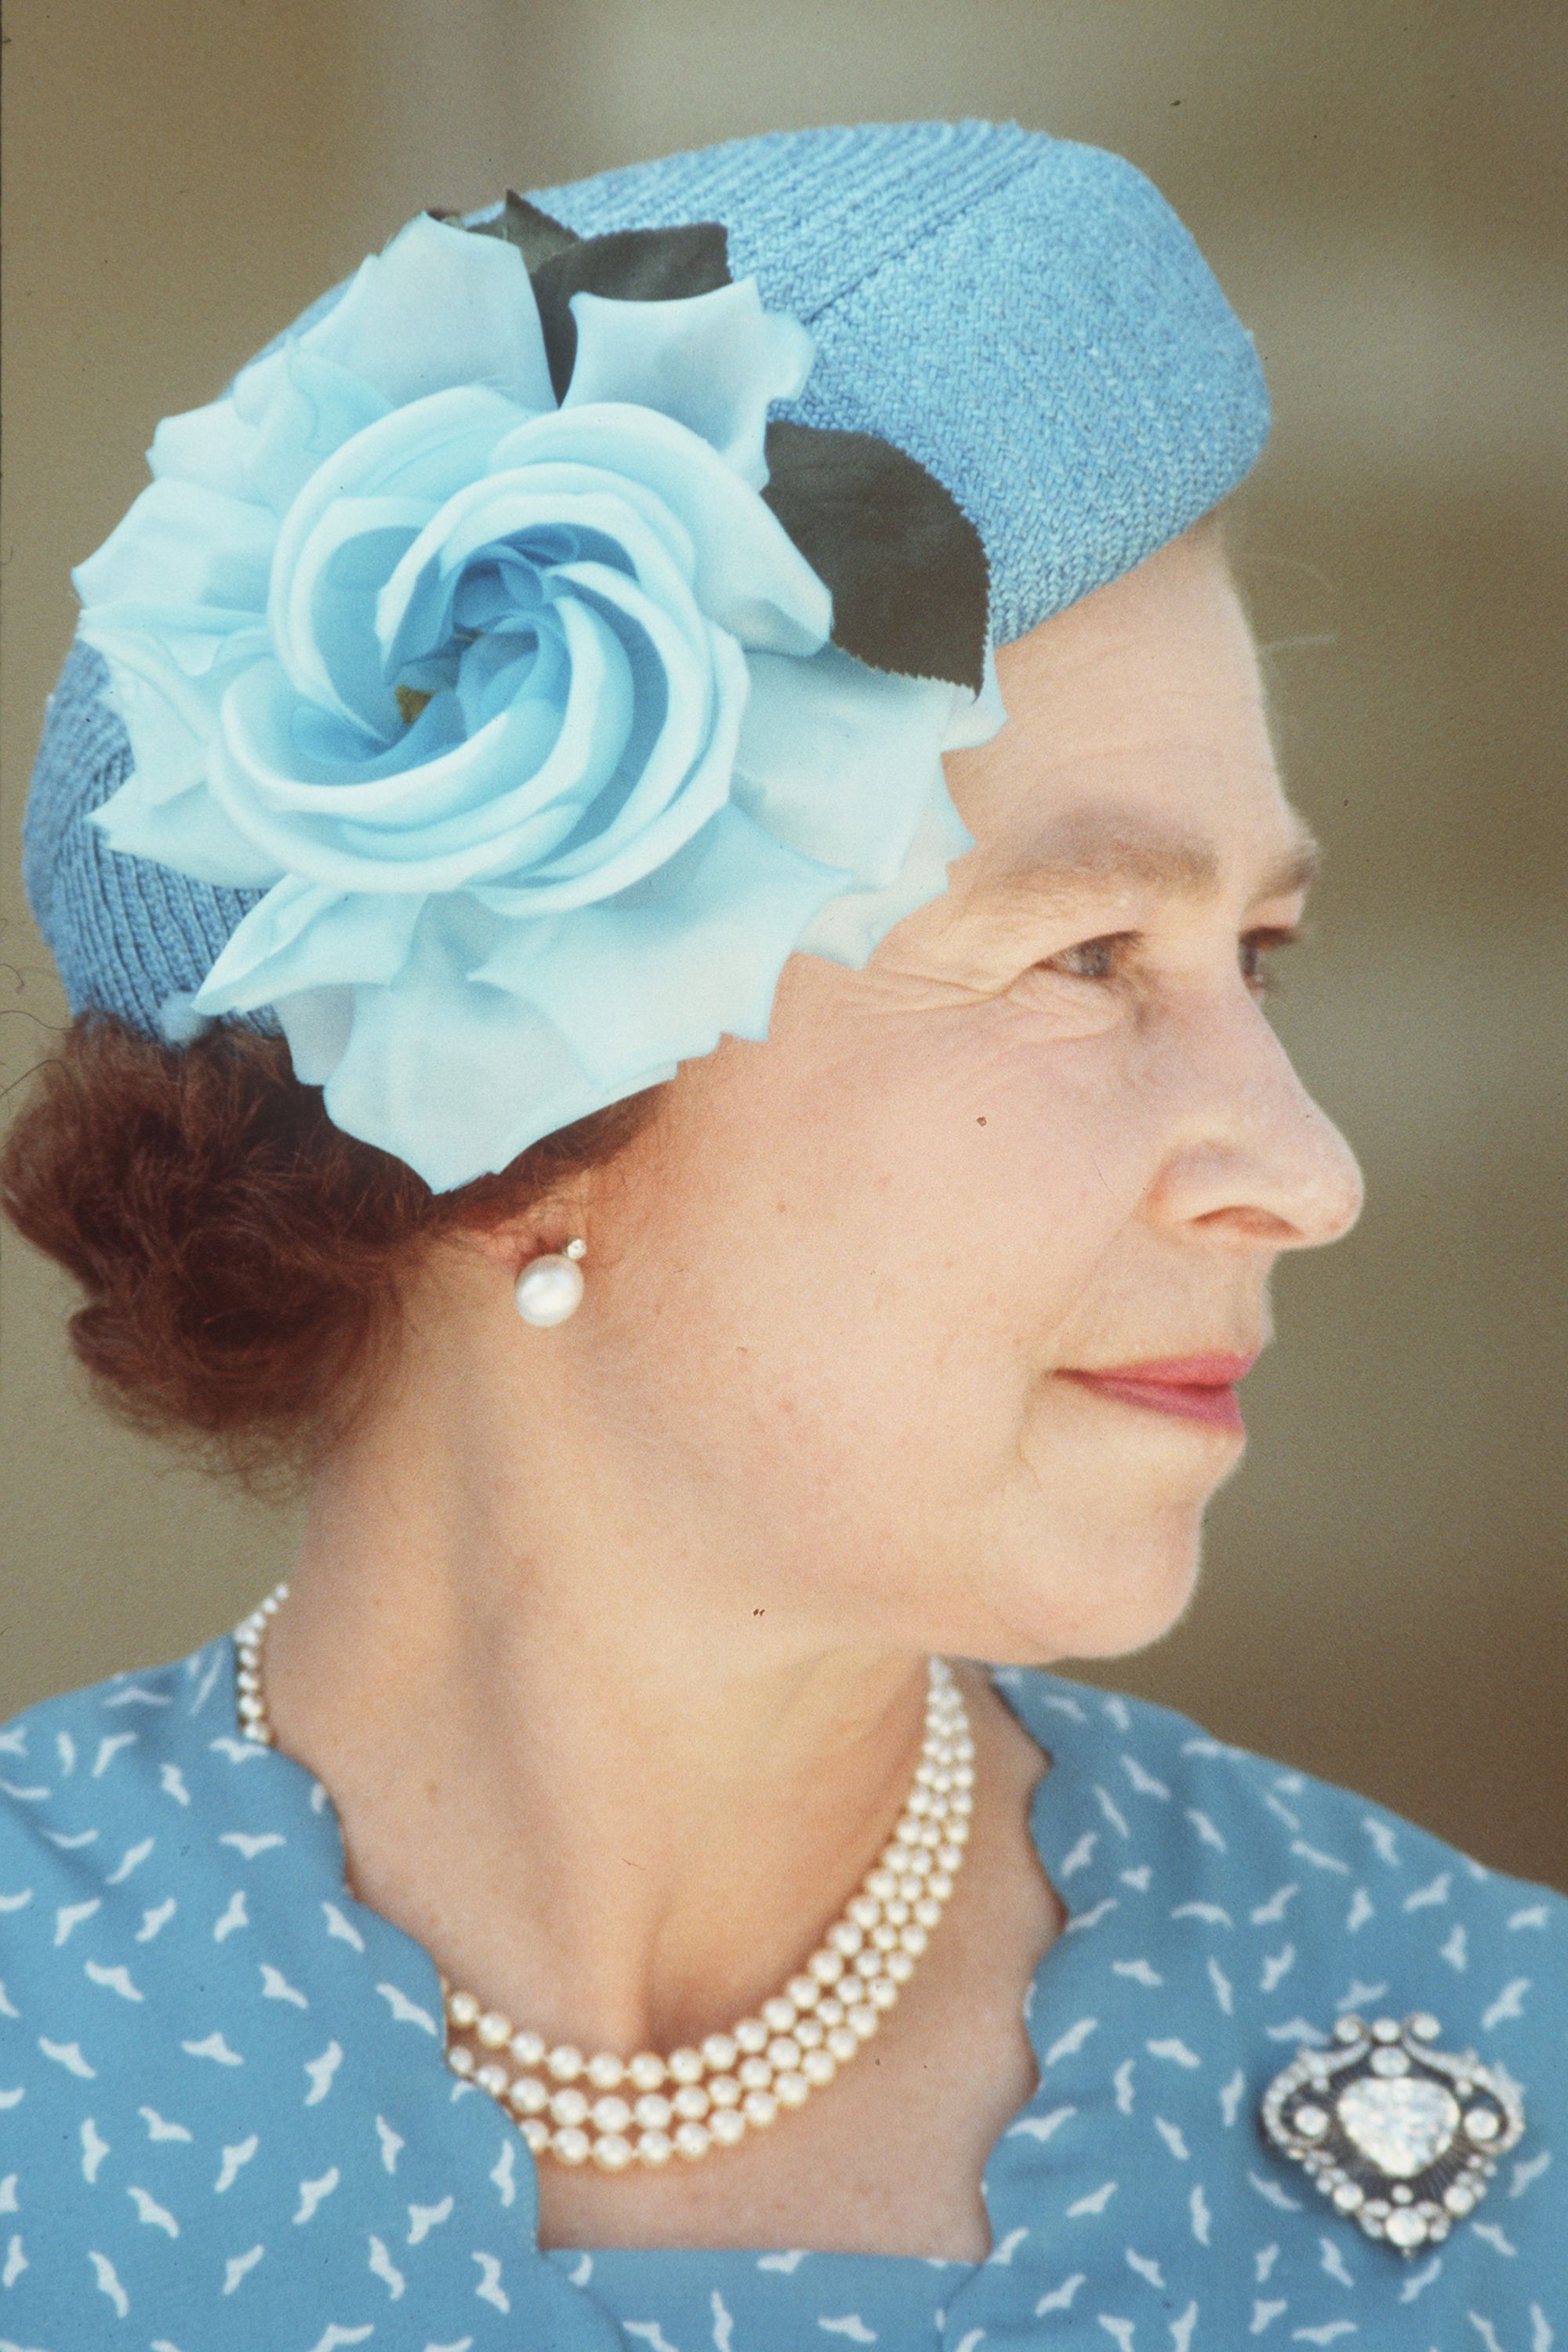 70 Best Royal Hats in History - Most Memorable Royal Family